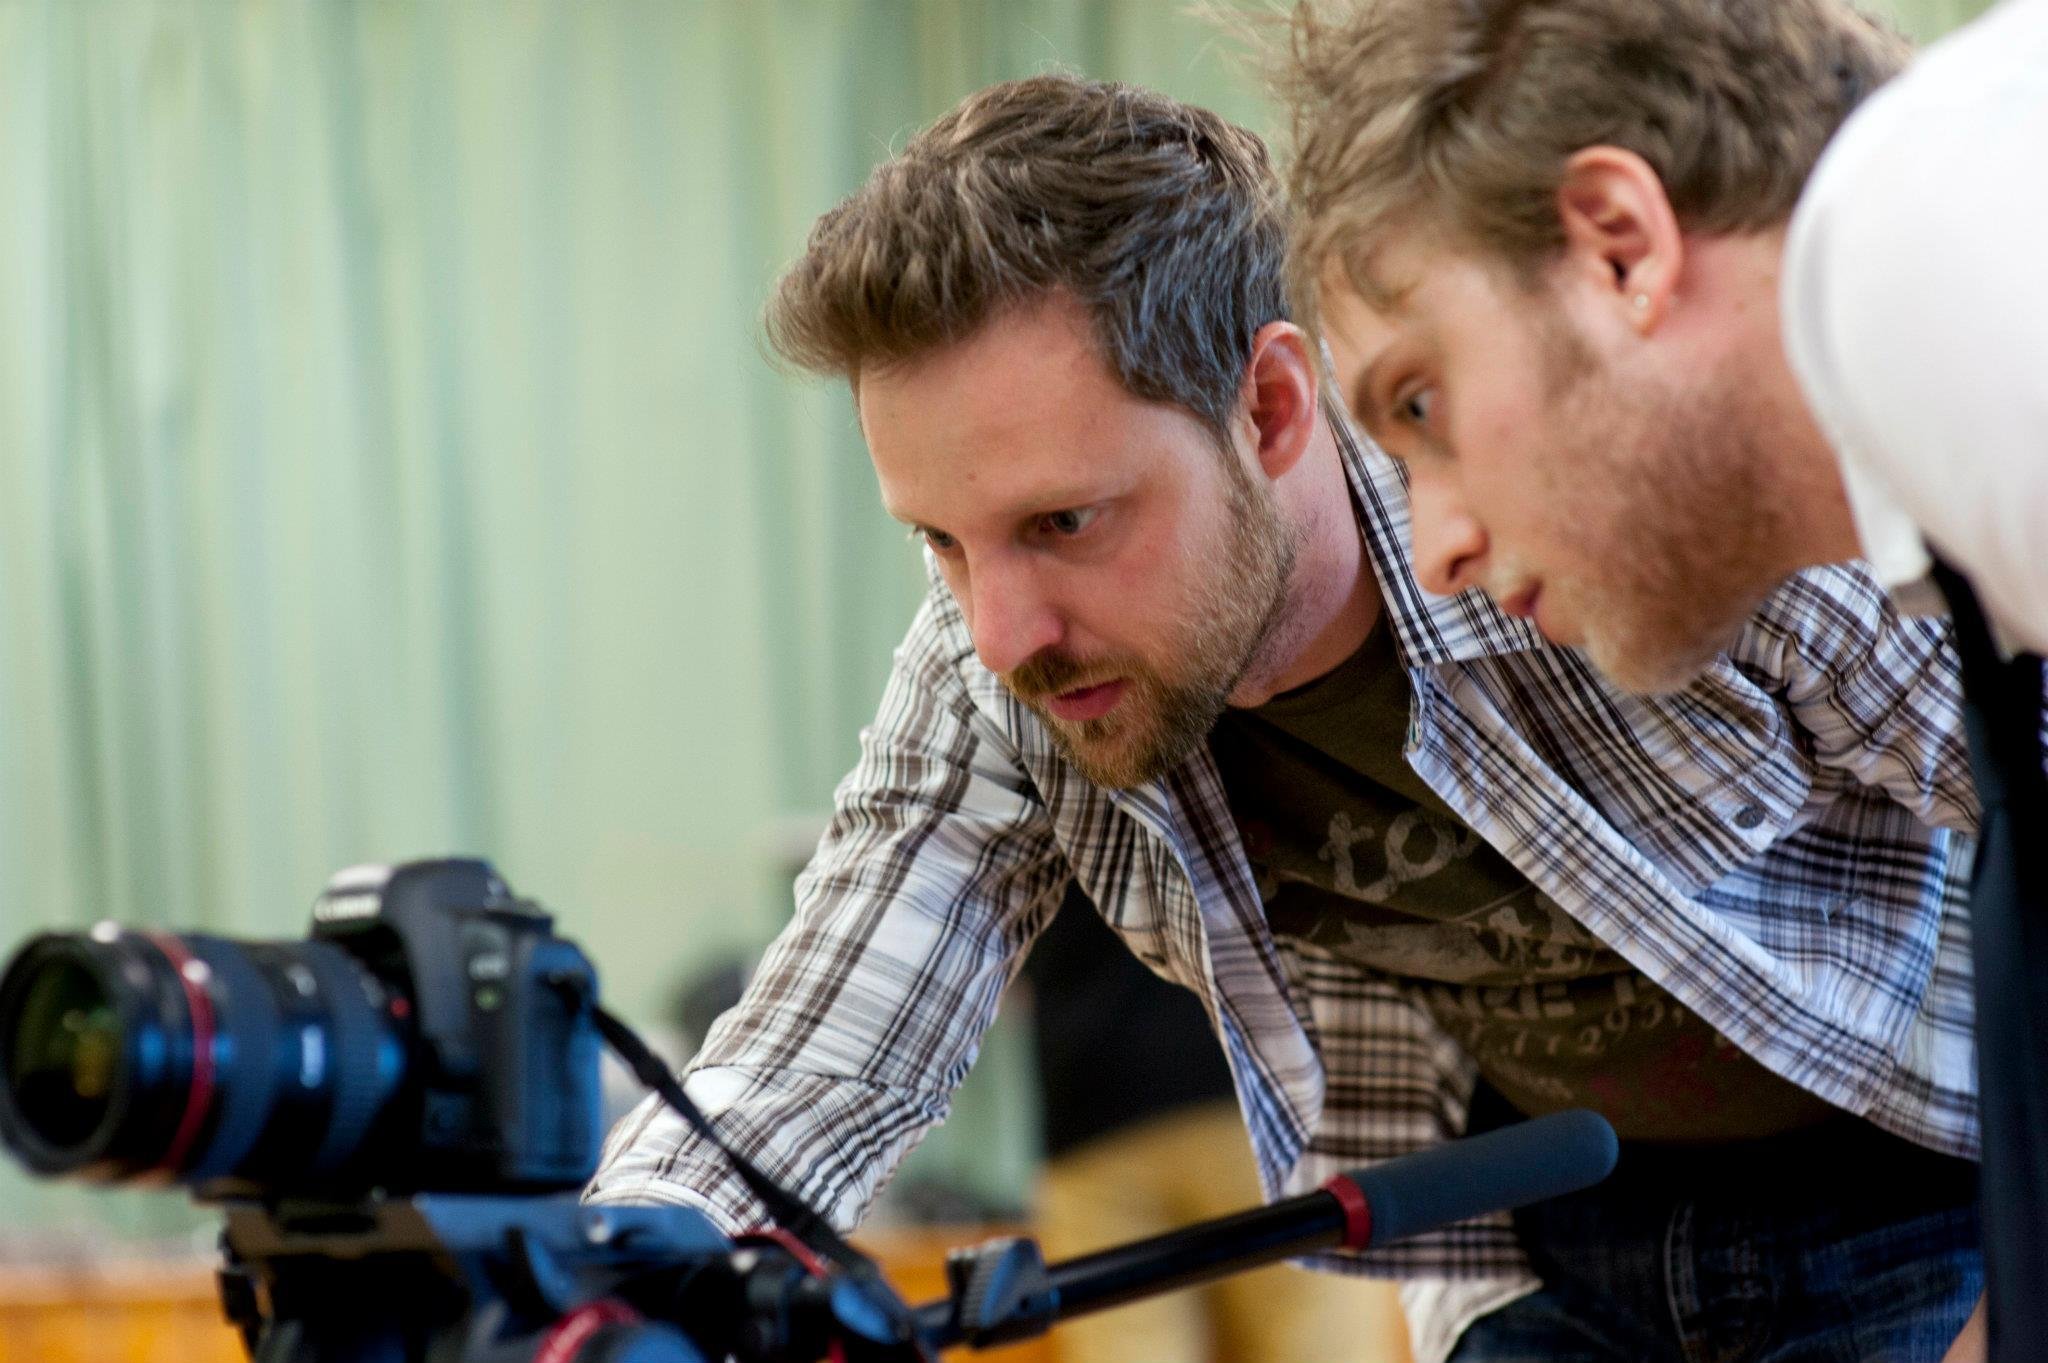 Director Kris Smith and DOP Stephen Rainer organising a shot in Damage.